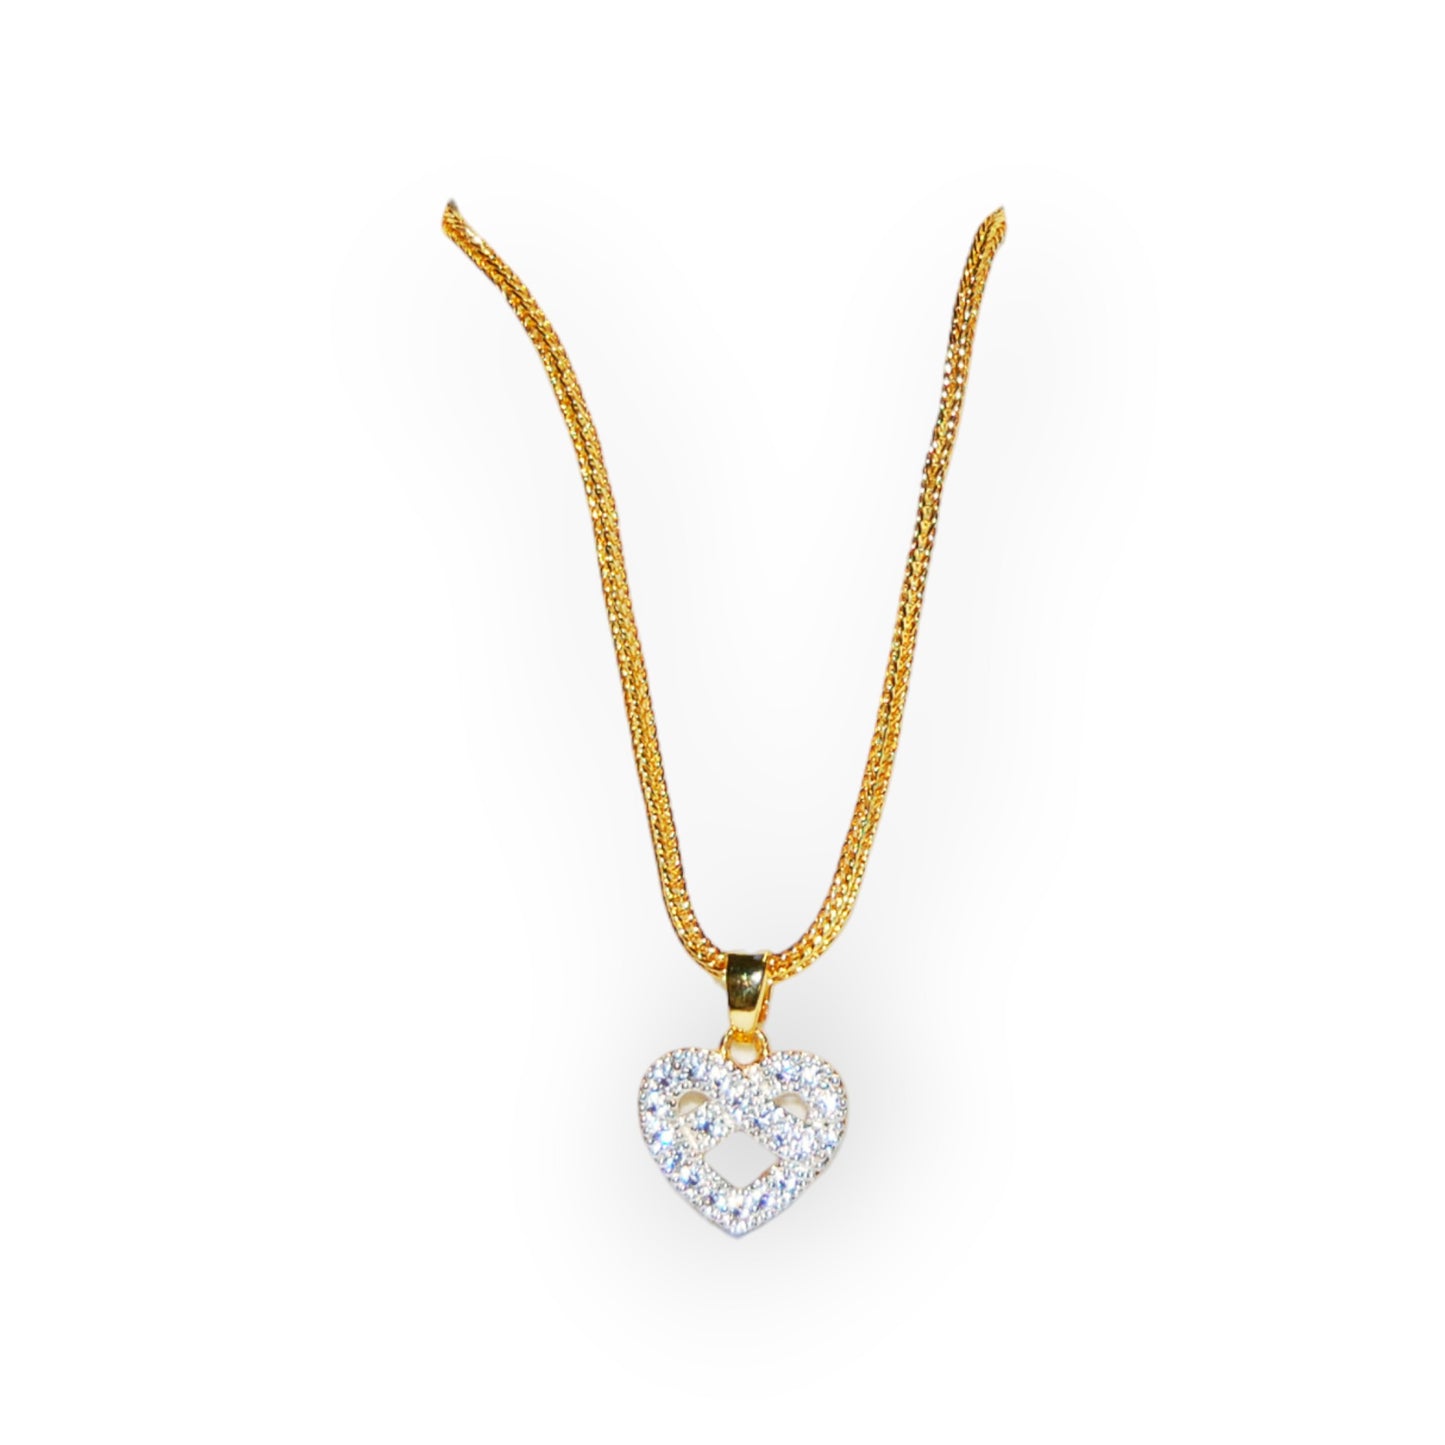 Gold-Plated Necklace and Heart Shaped Pendant